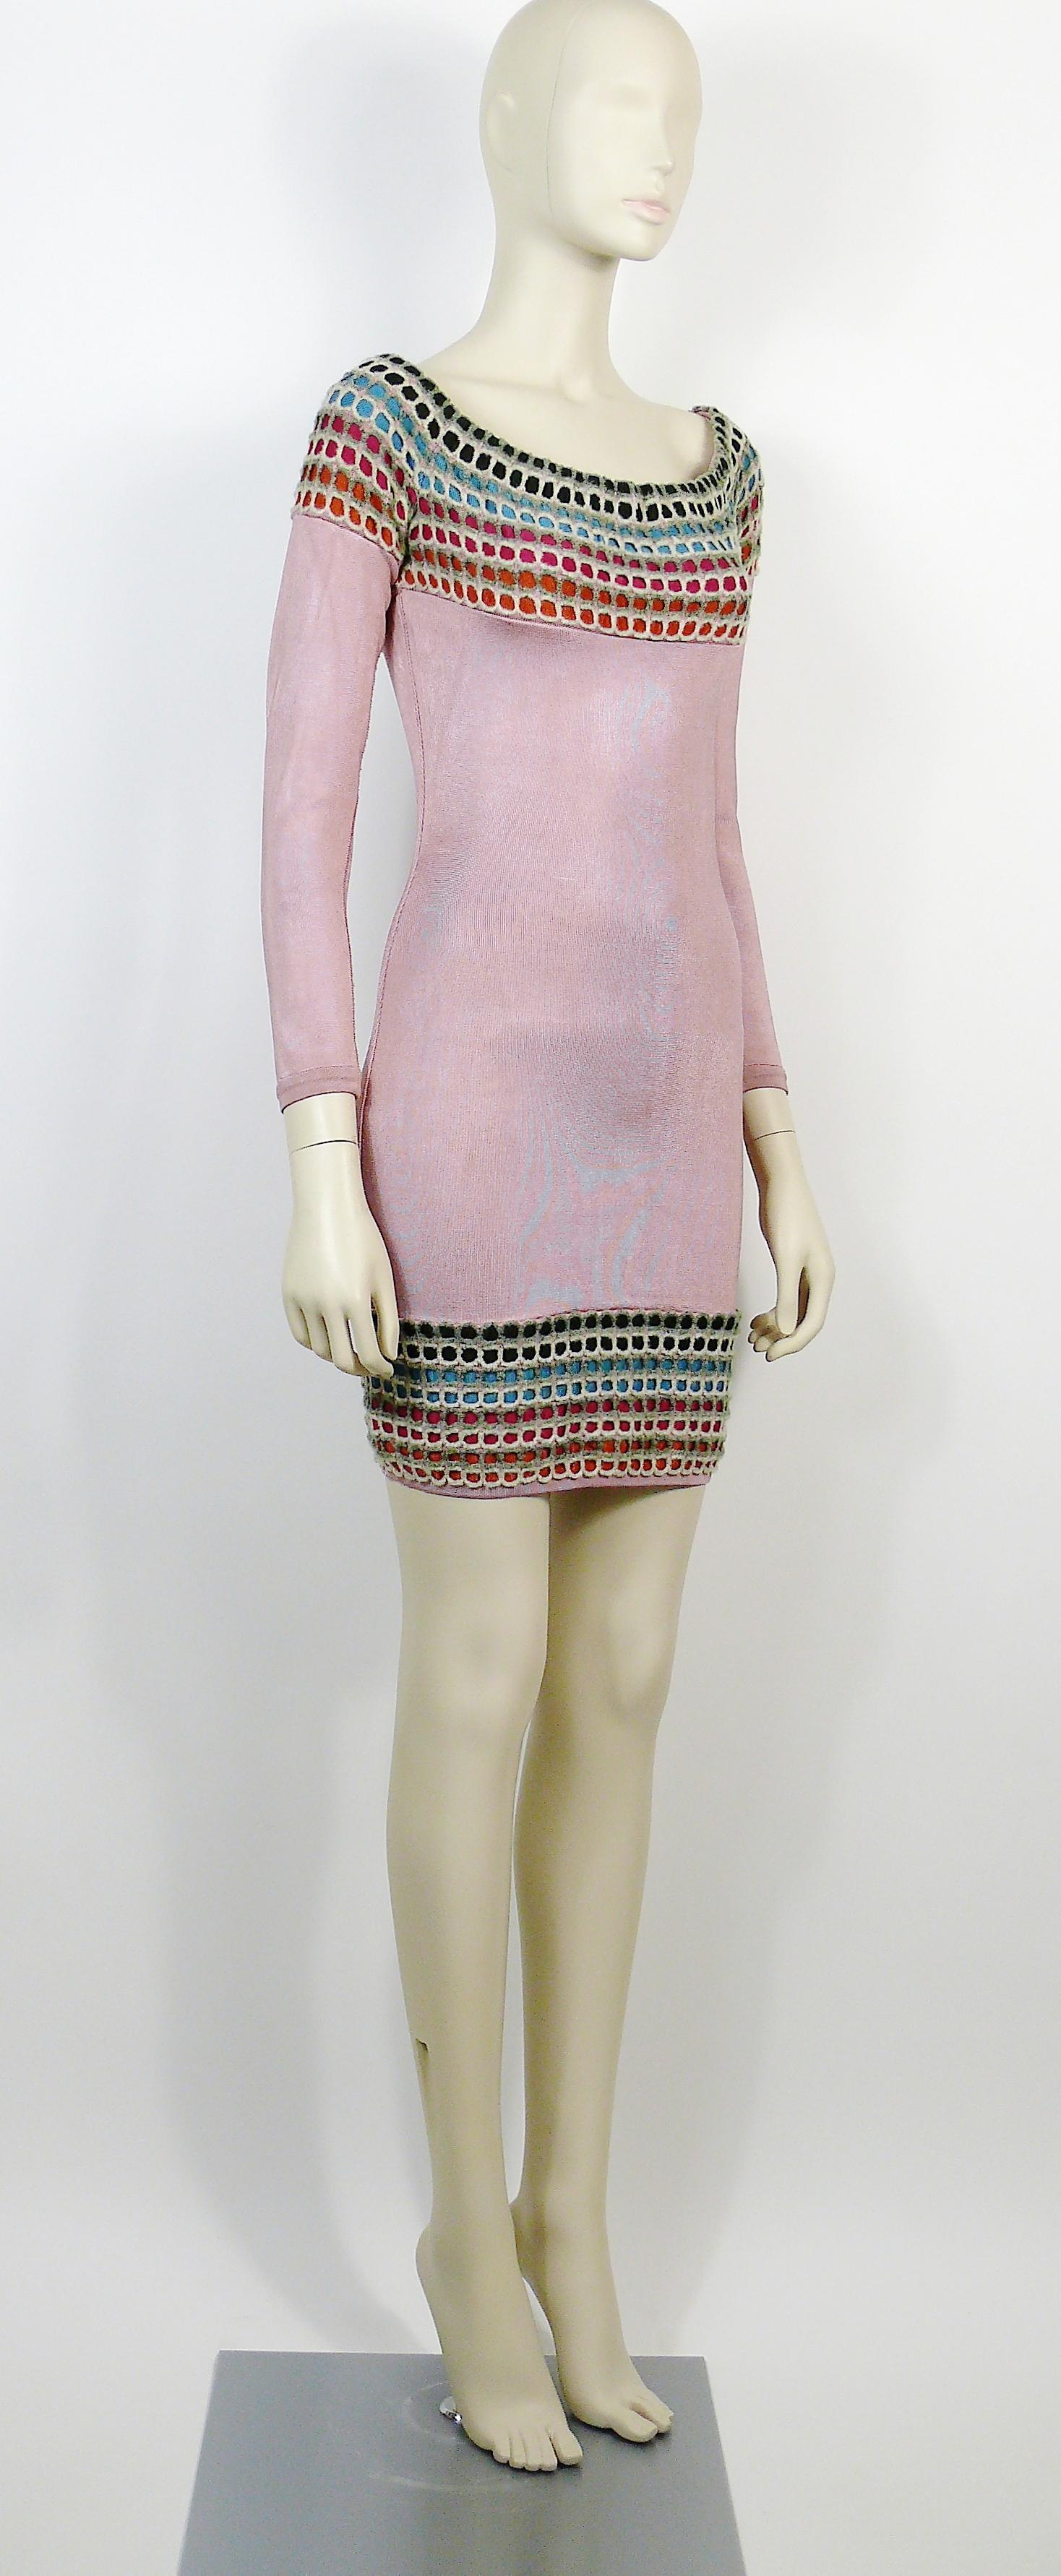 AZZEDINE ALAIA vintage knit dress with gorgeous rainbow honeycomb details.

This dress features :
- Stretchy fabric made of rayon, nylon and spandex.
- Rainbow honeycomb knit design on collar, shoulders and bottom.
- Slash neck.
- Rear zip